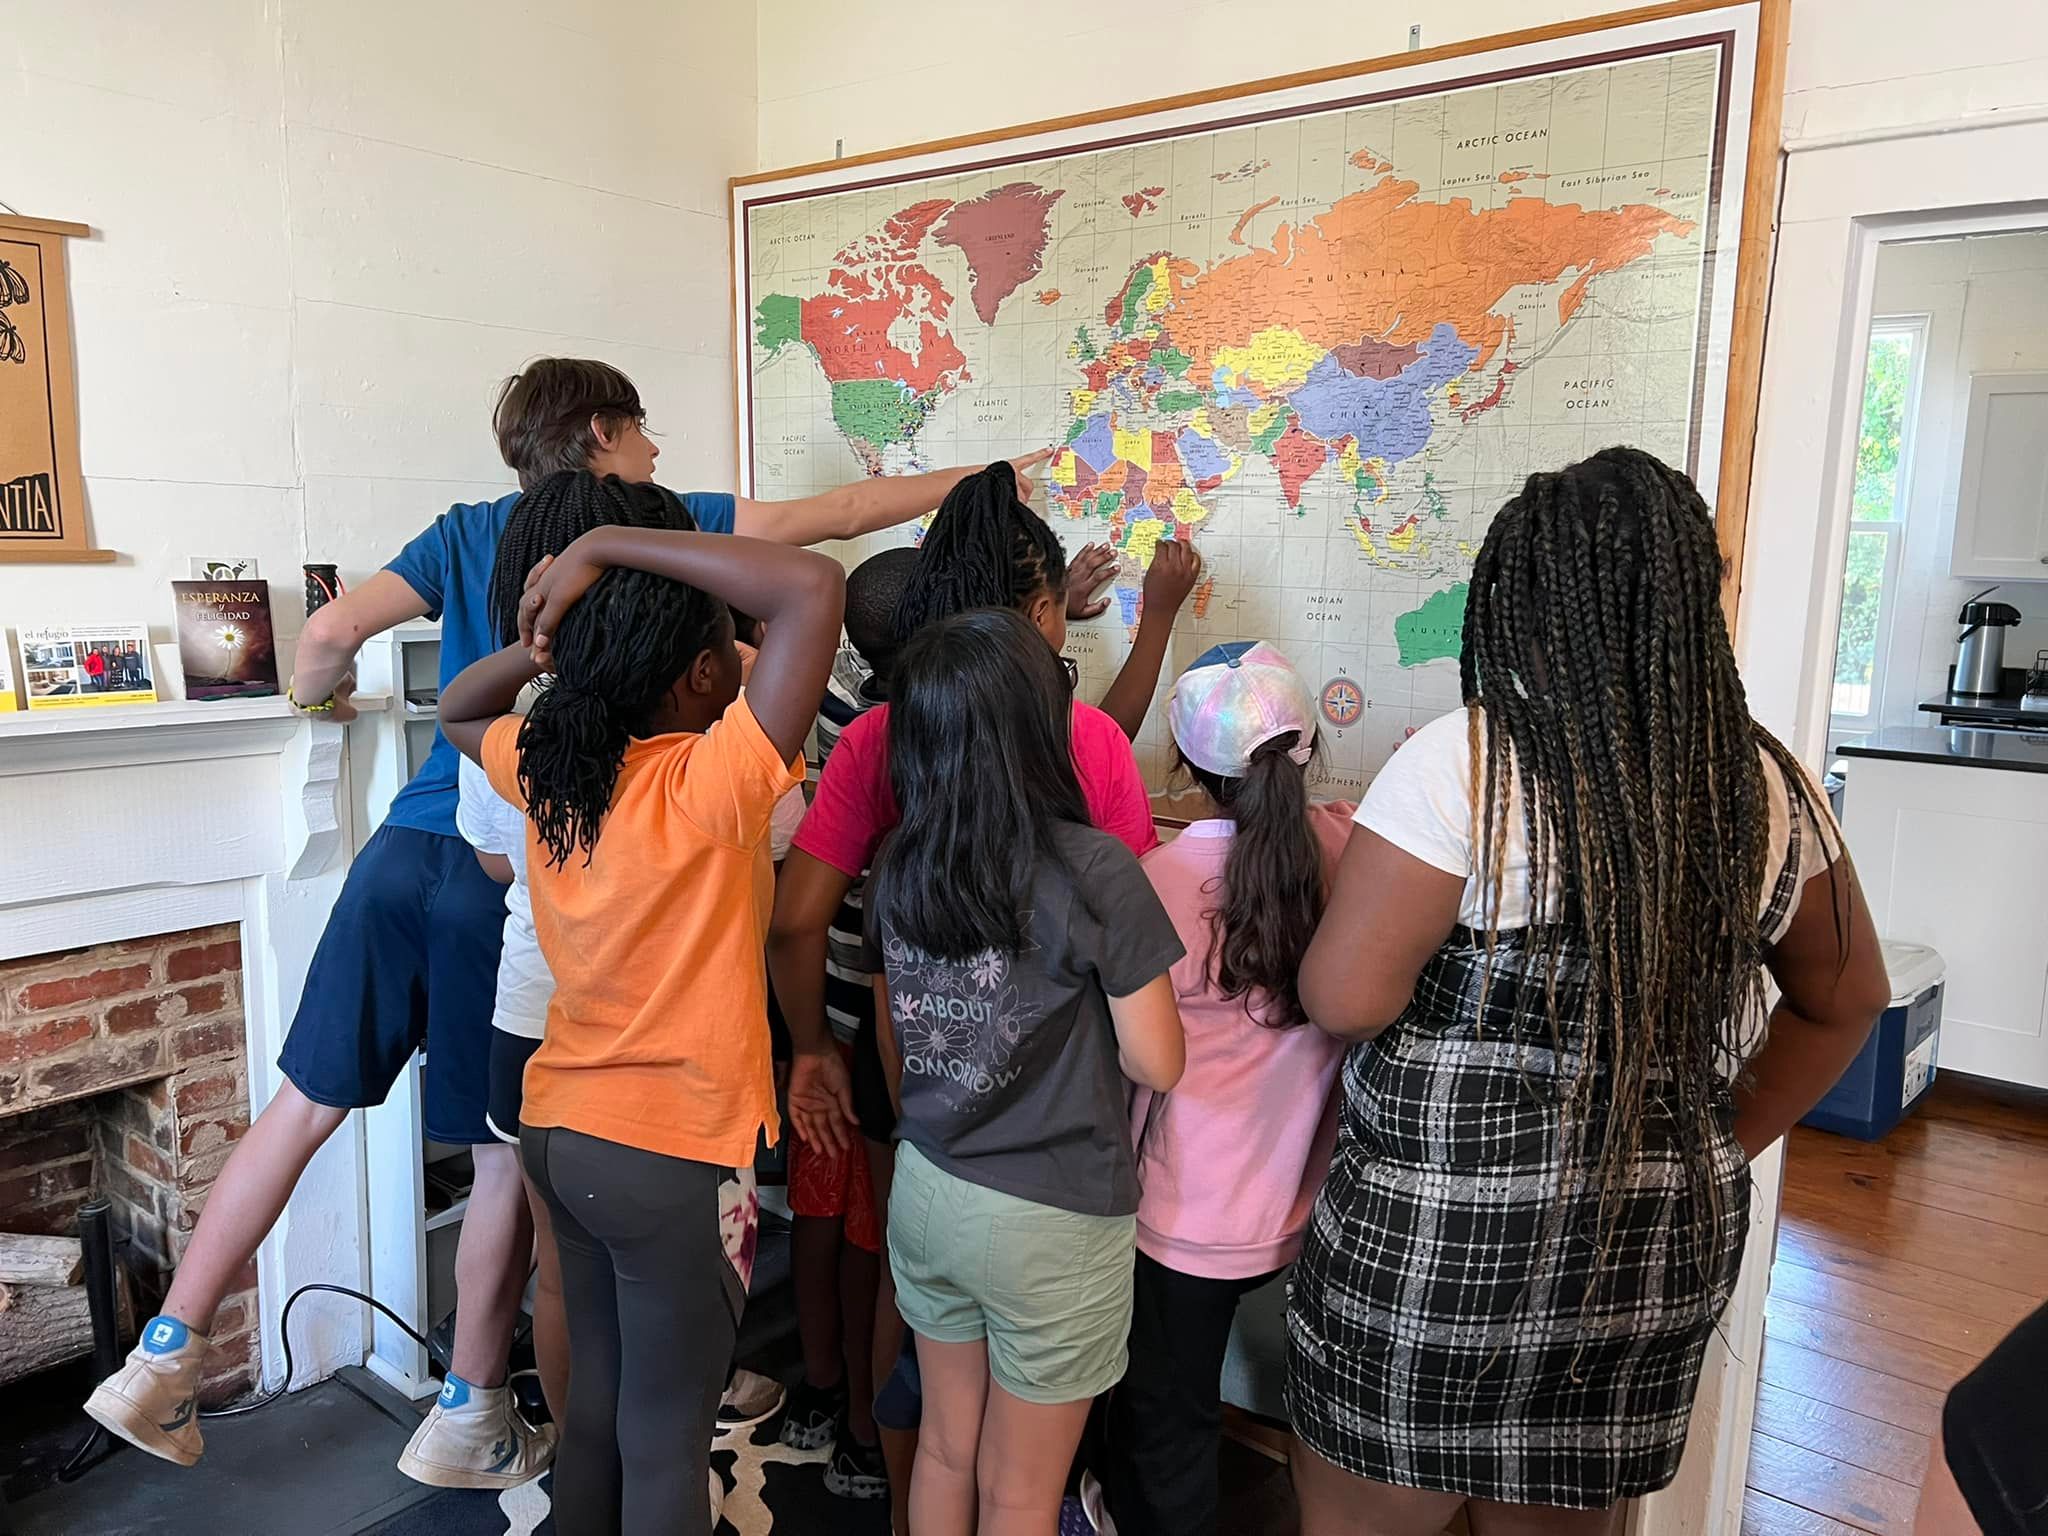 a group of young people pointing at a map on the wall